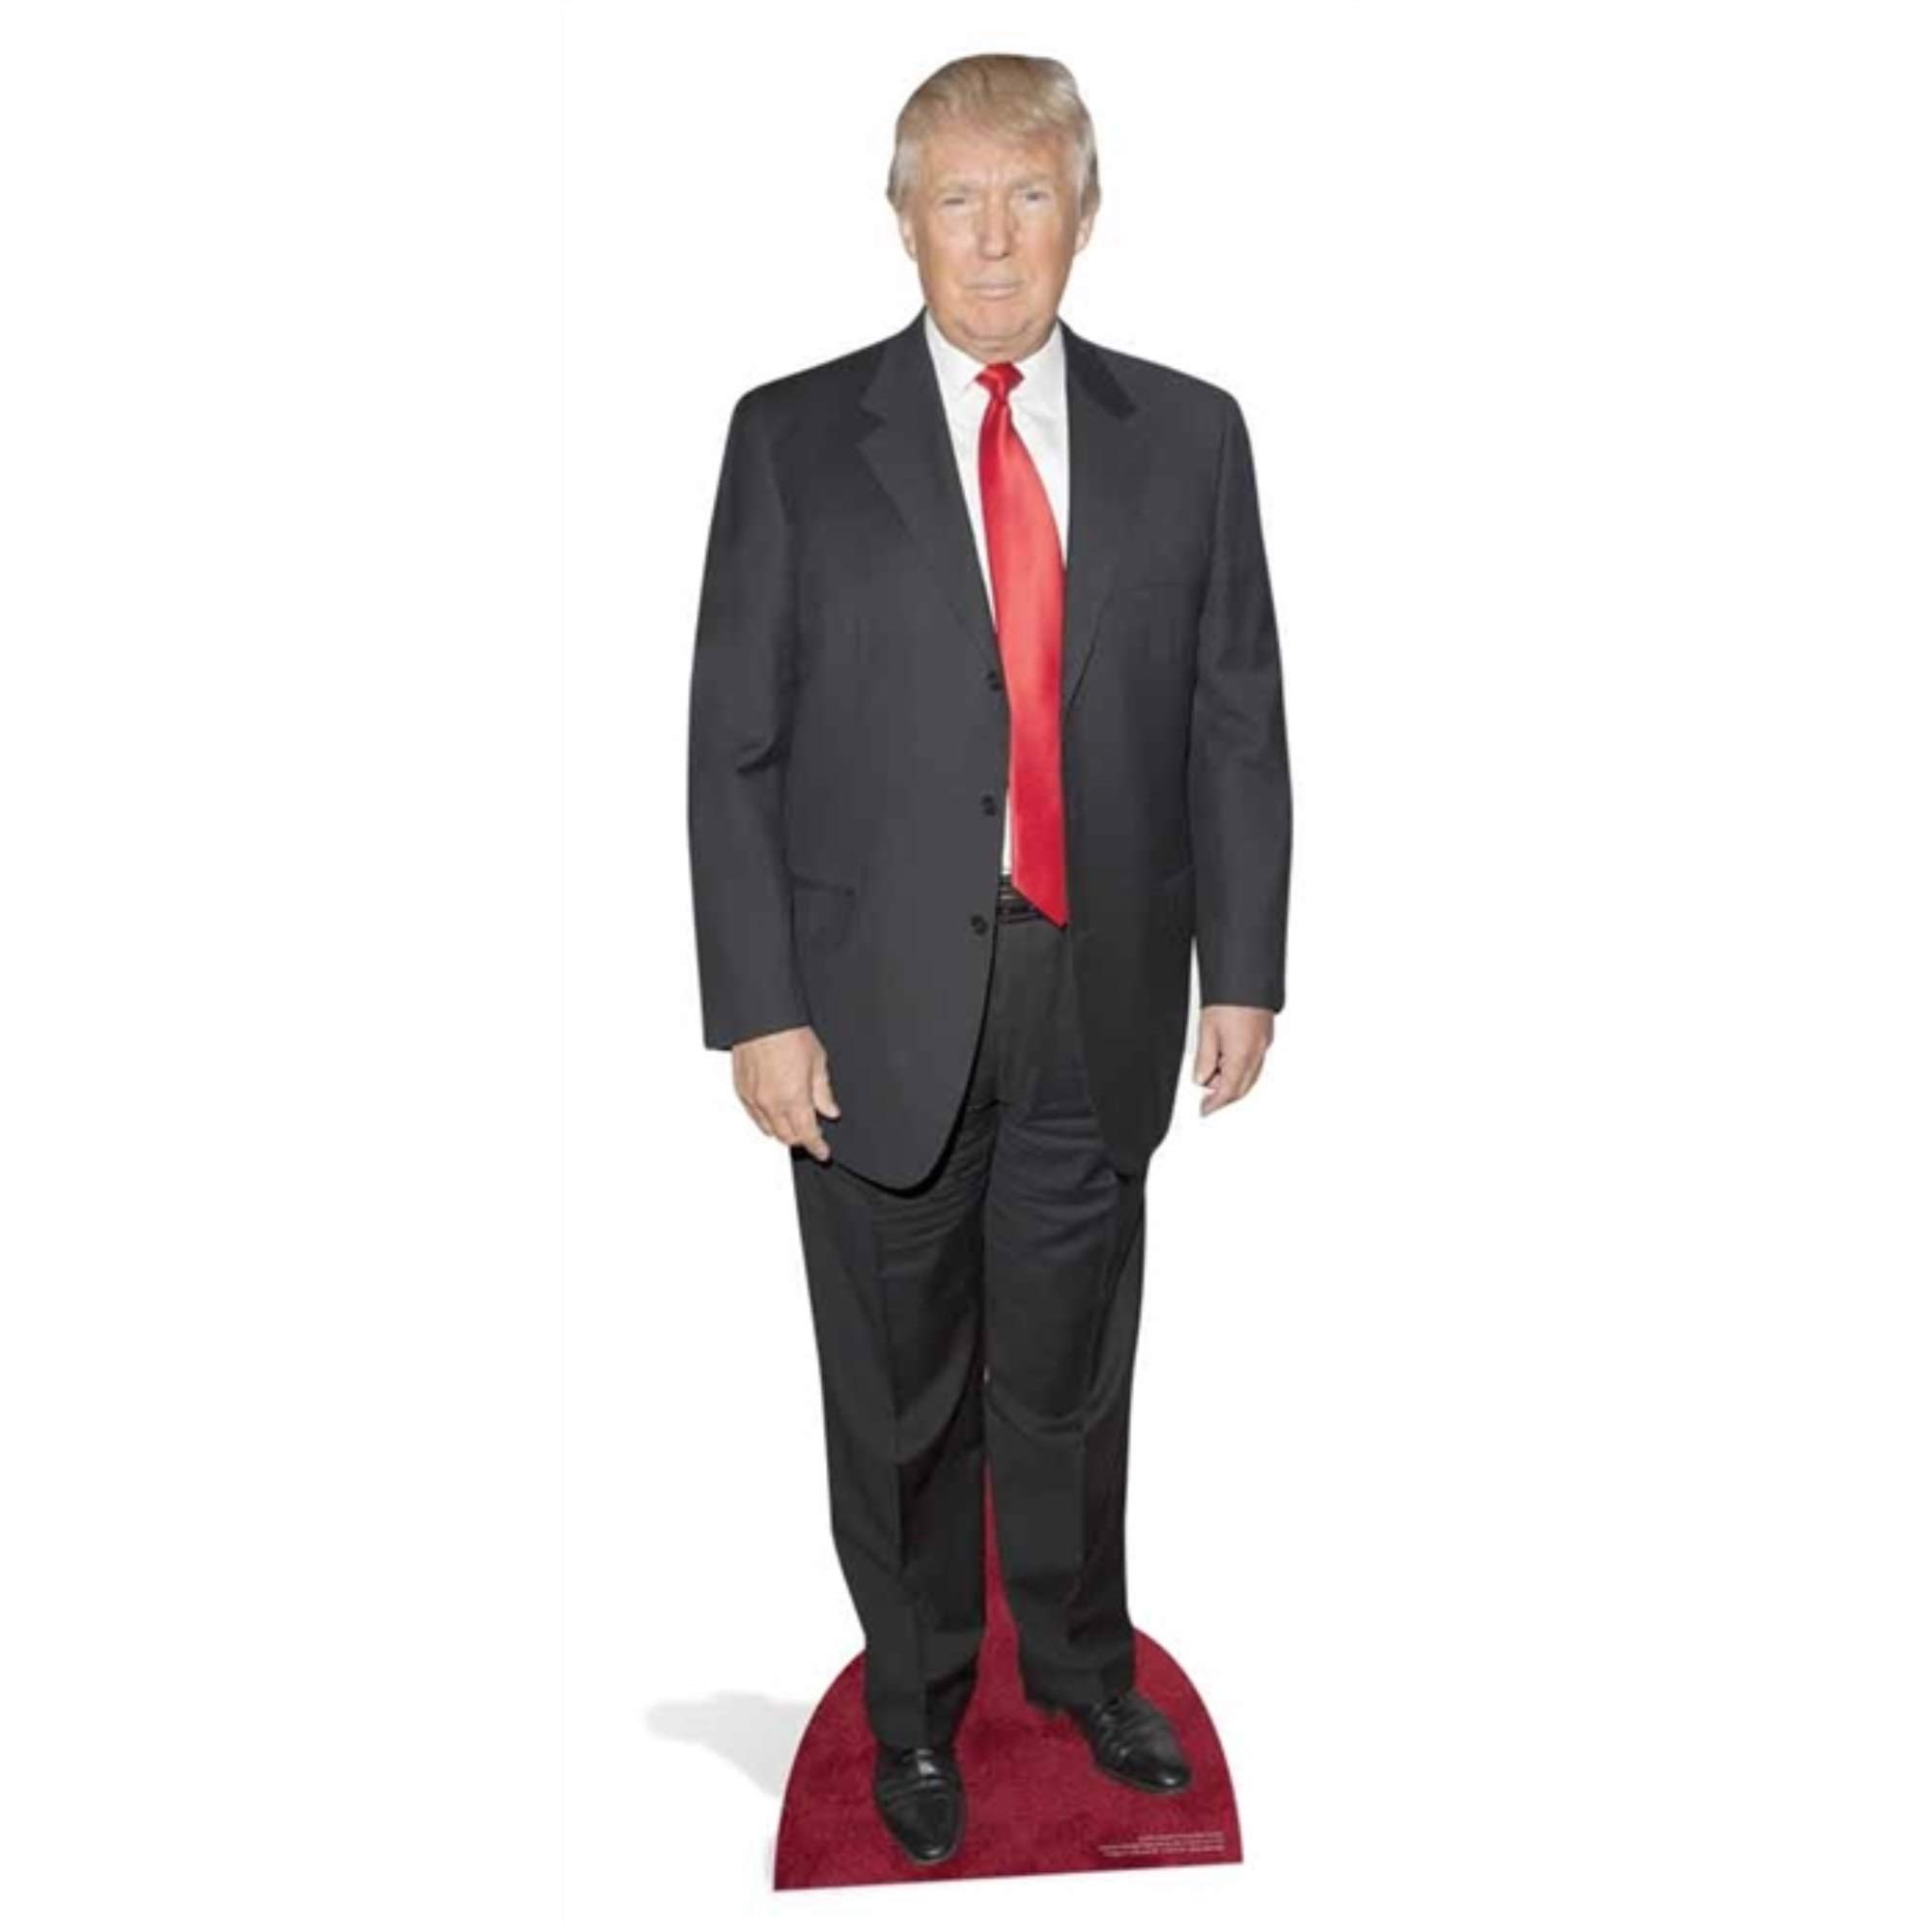 Star Cutouts, President Trump in Red Carpet, Cardboard Cutout Standup, Politician Life-Size Stand-In - 74" x 25"